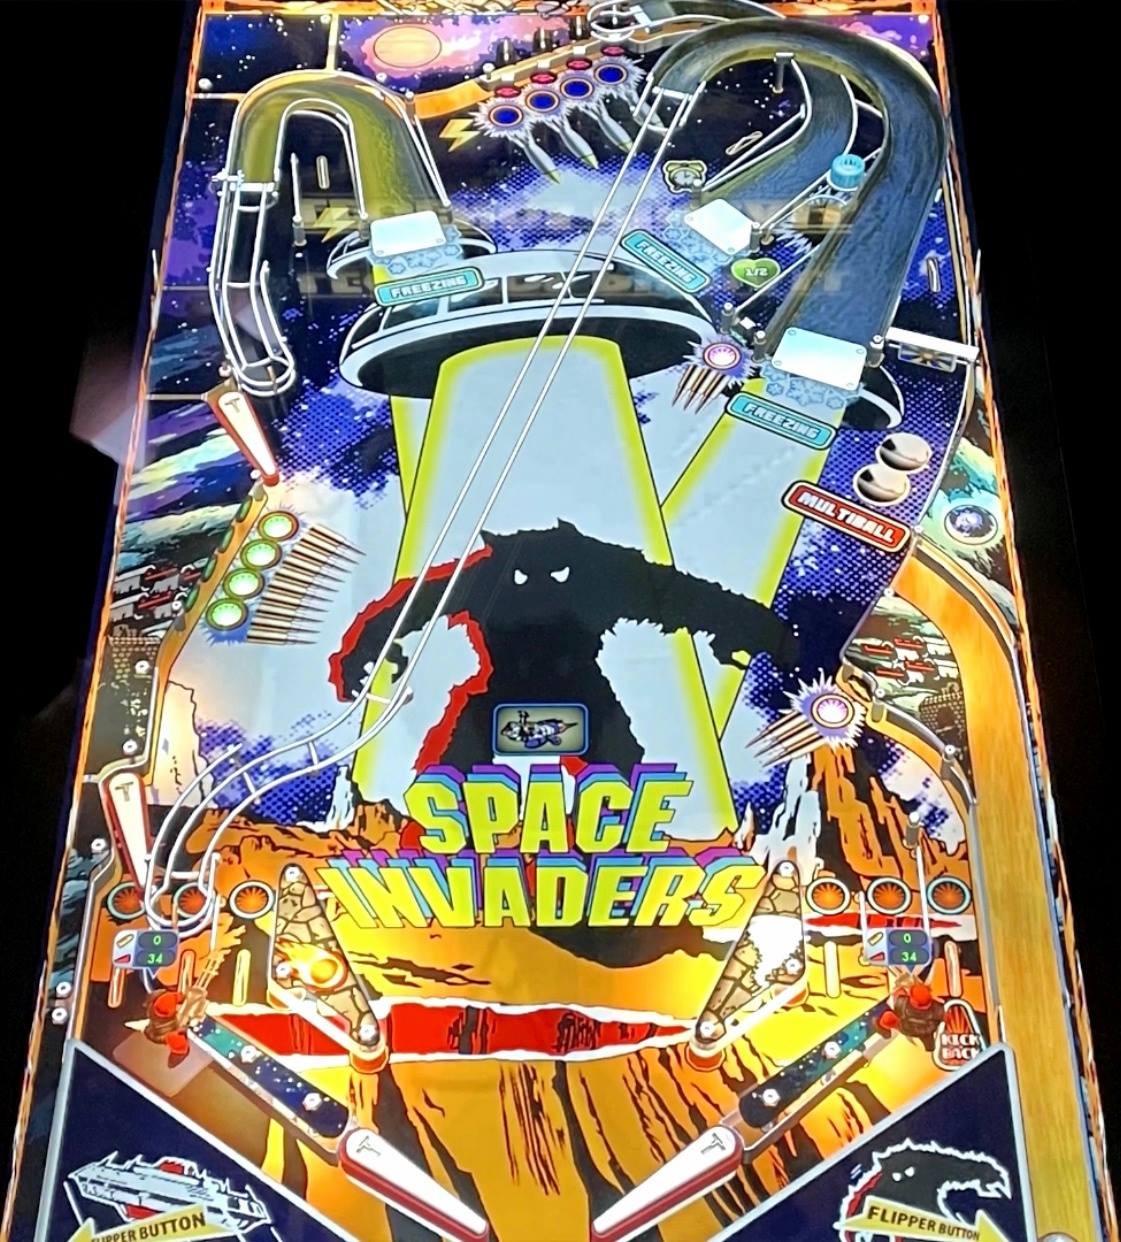 Image of the Space Invader pinball